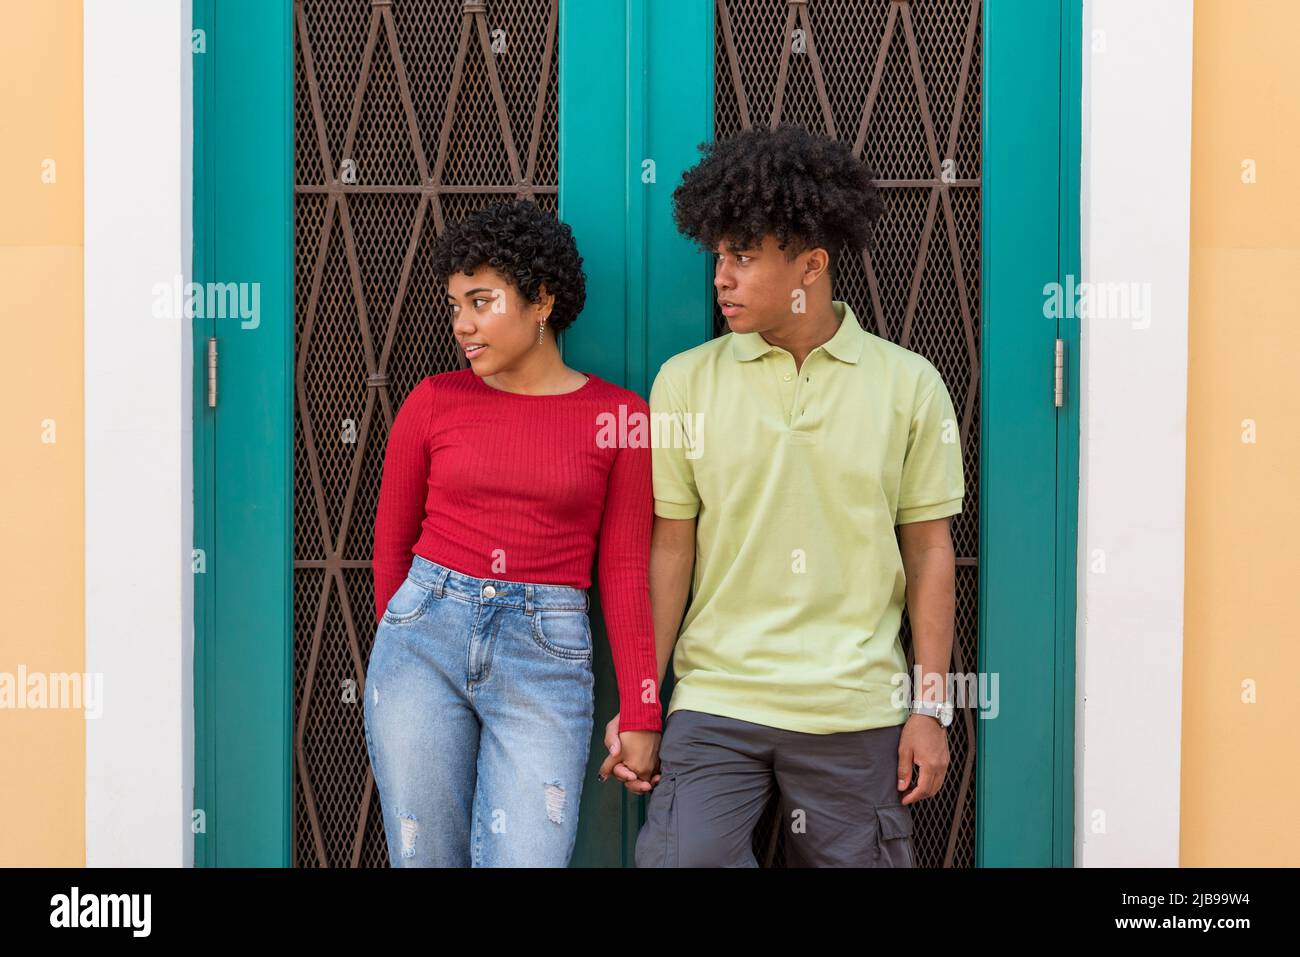 Portrait of smiling couple in front of wall, Panama city - stock photo Stock Photo